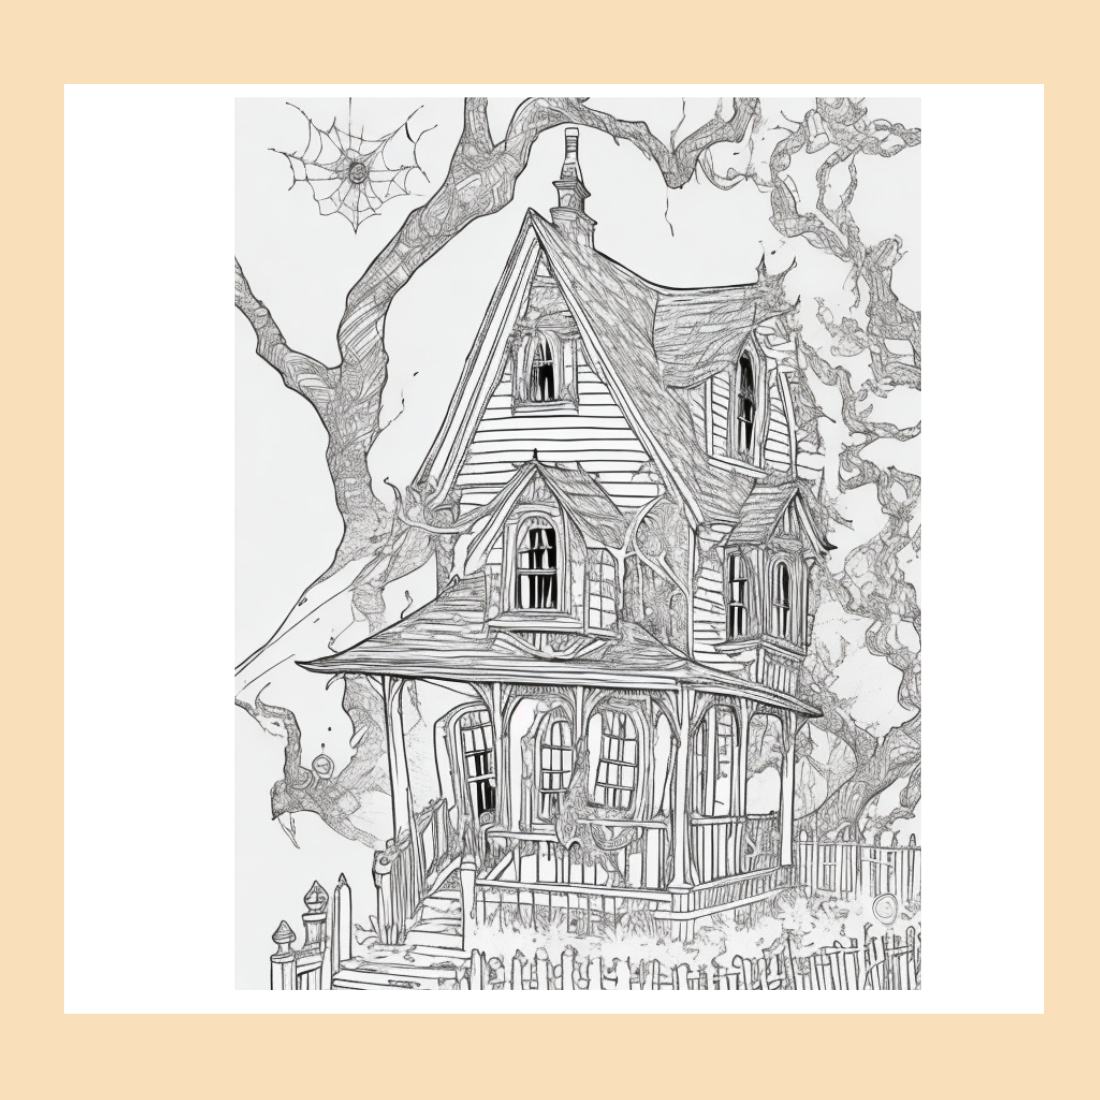 A haunted house with ghosts and cobwebs coloring page for adult 4 preview image.